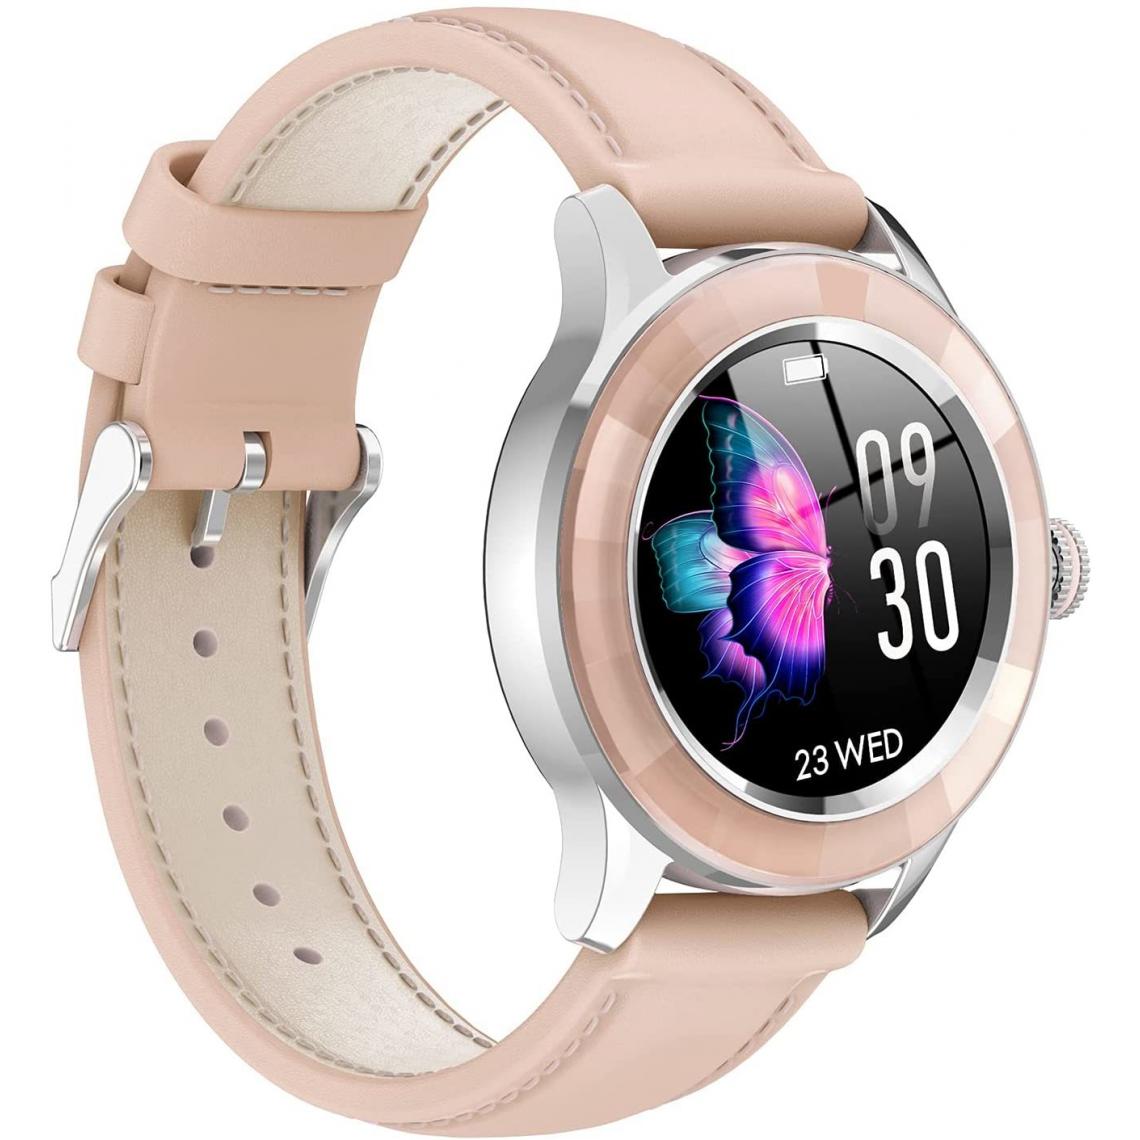 Chronotech Montres - Chronus Smart Watch women elegant high quality IP67 waterproof with fitness tracker, heart rate sleep monitor, calorie step counter(gold) - Montre connectée